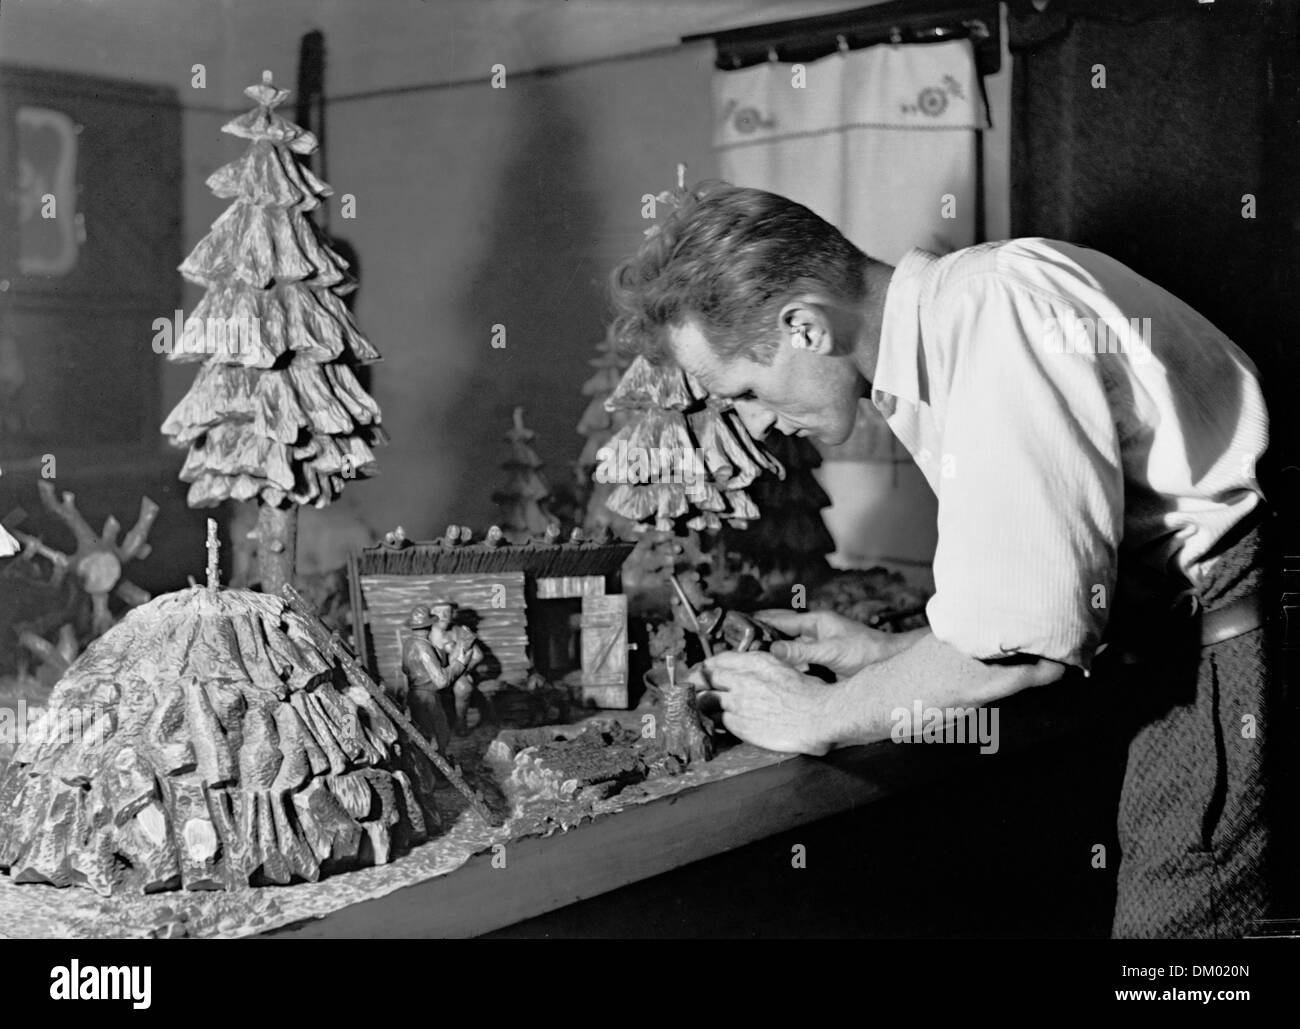 The wood craftsman Paul Winkler from the Ore Mountains is pictured working on a Christmas mountain, undated photograph (around 1930). Photo: Deutsche Fotothek / Beck Stock Photo